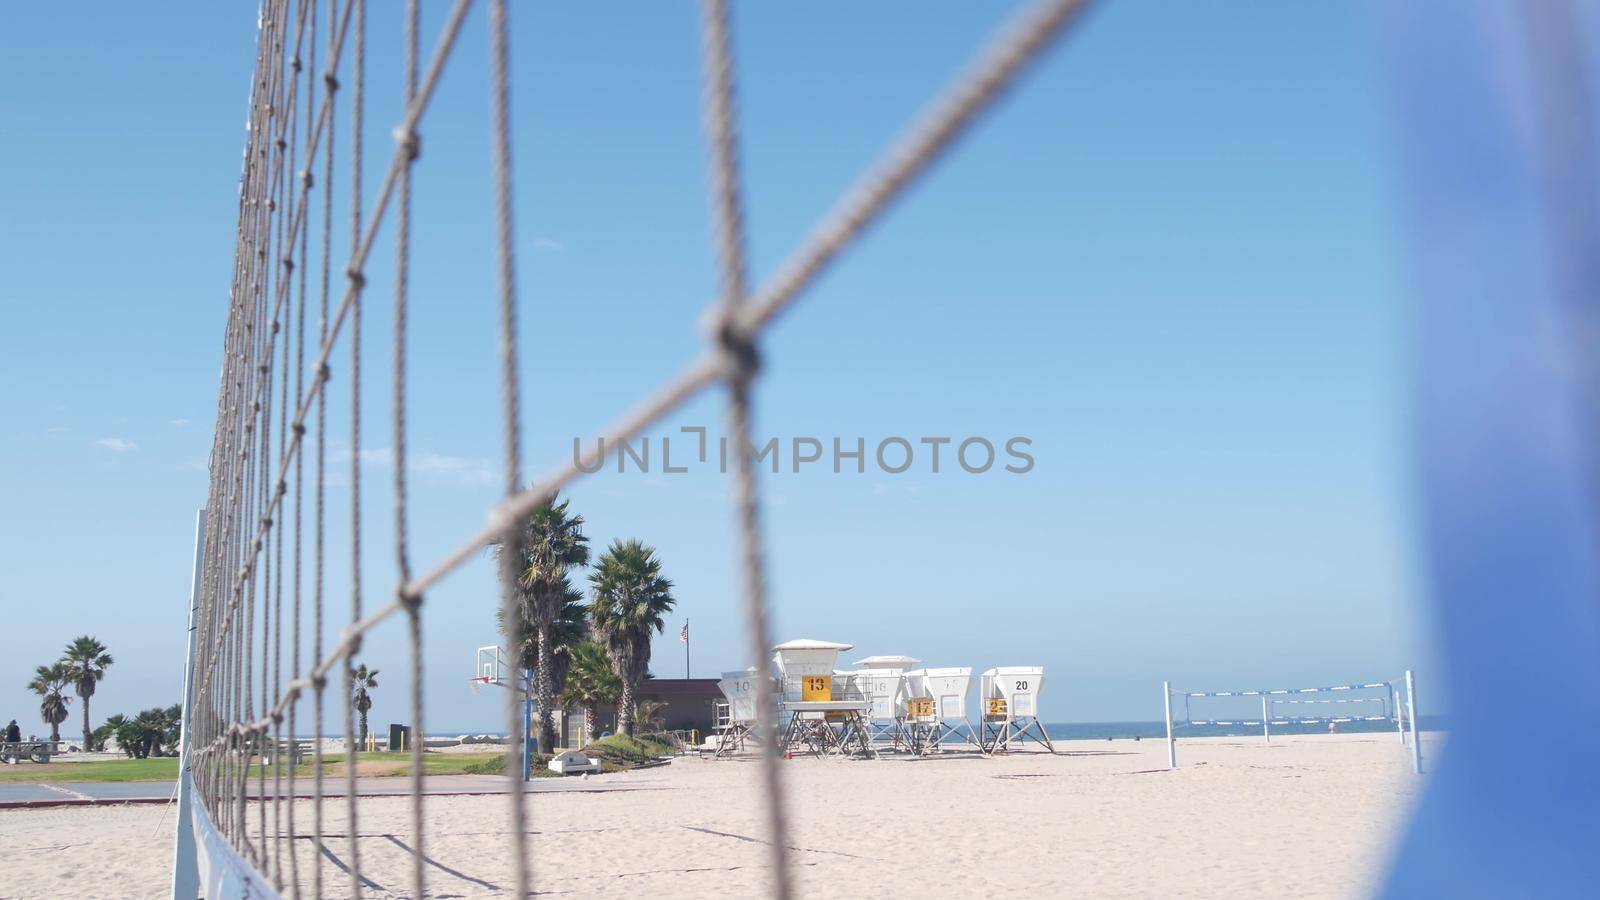 Volley ball net on court for volleyball game on beach, California coast, USA. Sport field or playground for players on sandy ocean shore, lifeguard station and palm trees on Mission beach, San Diego.